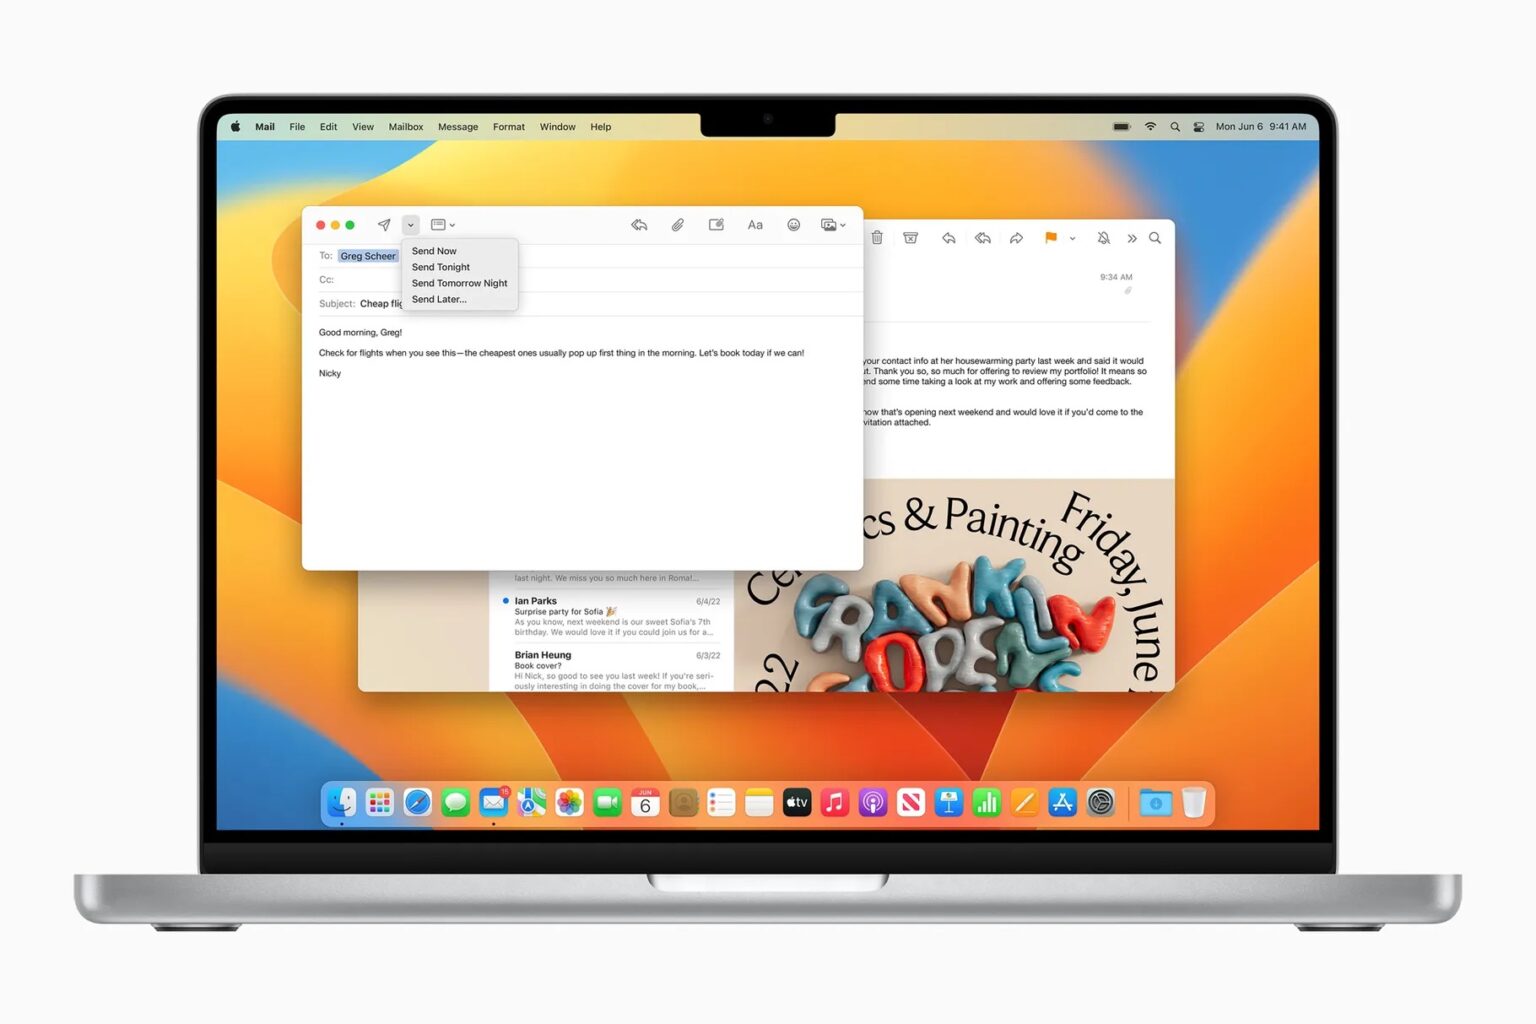 Apple's bringing some much-wanted features to it native email client.